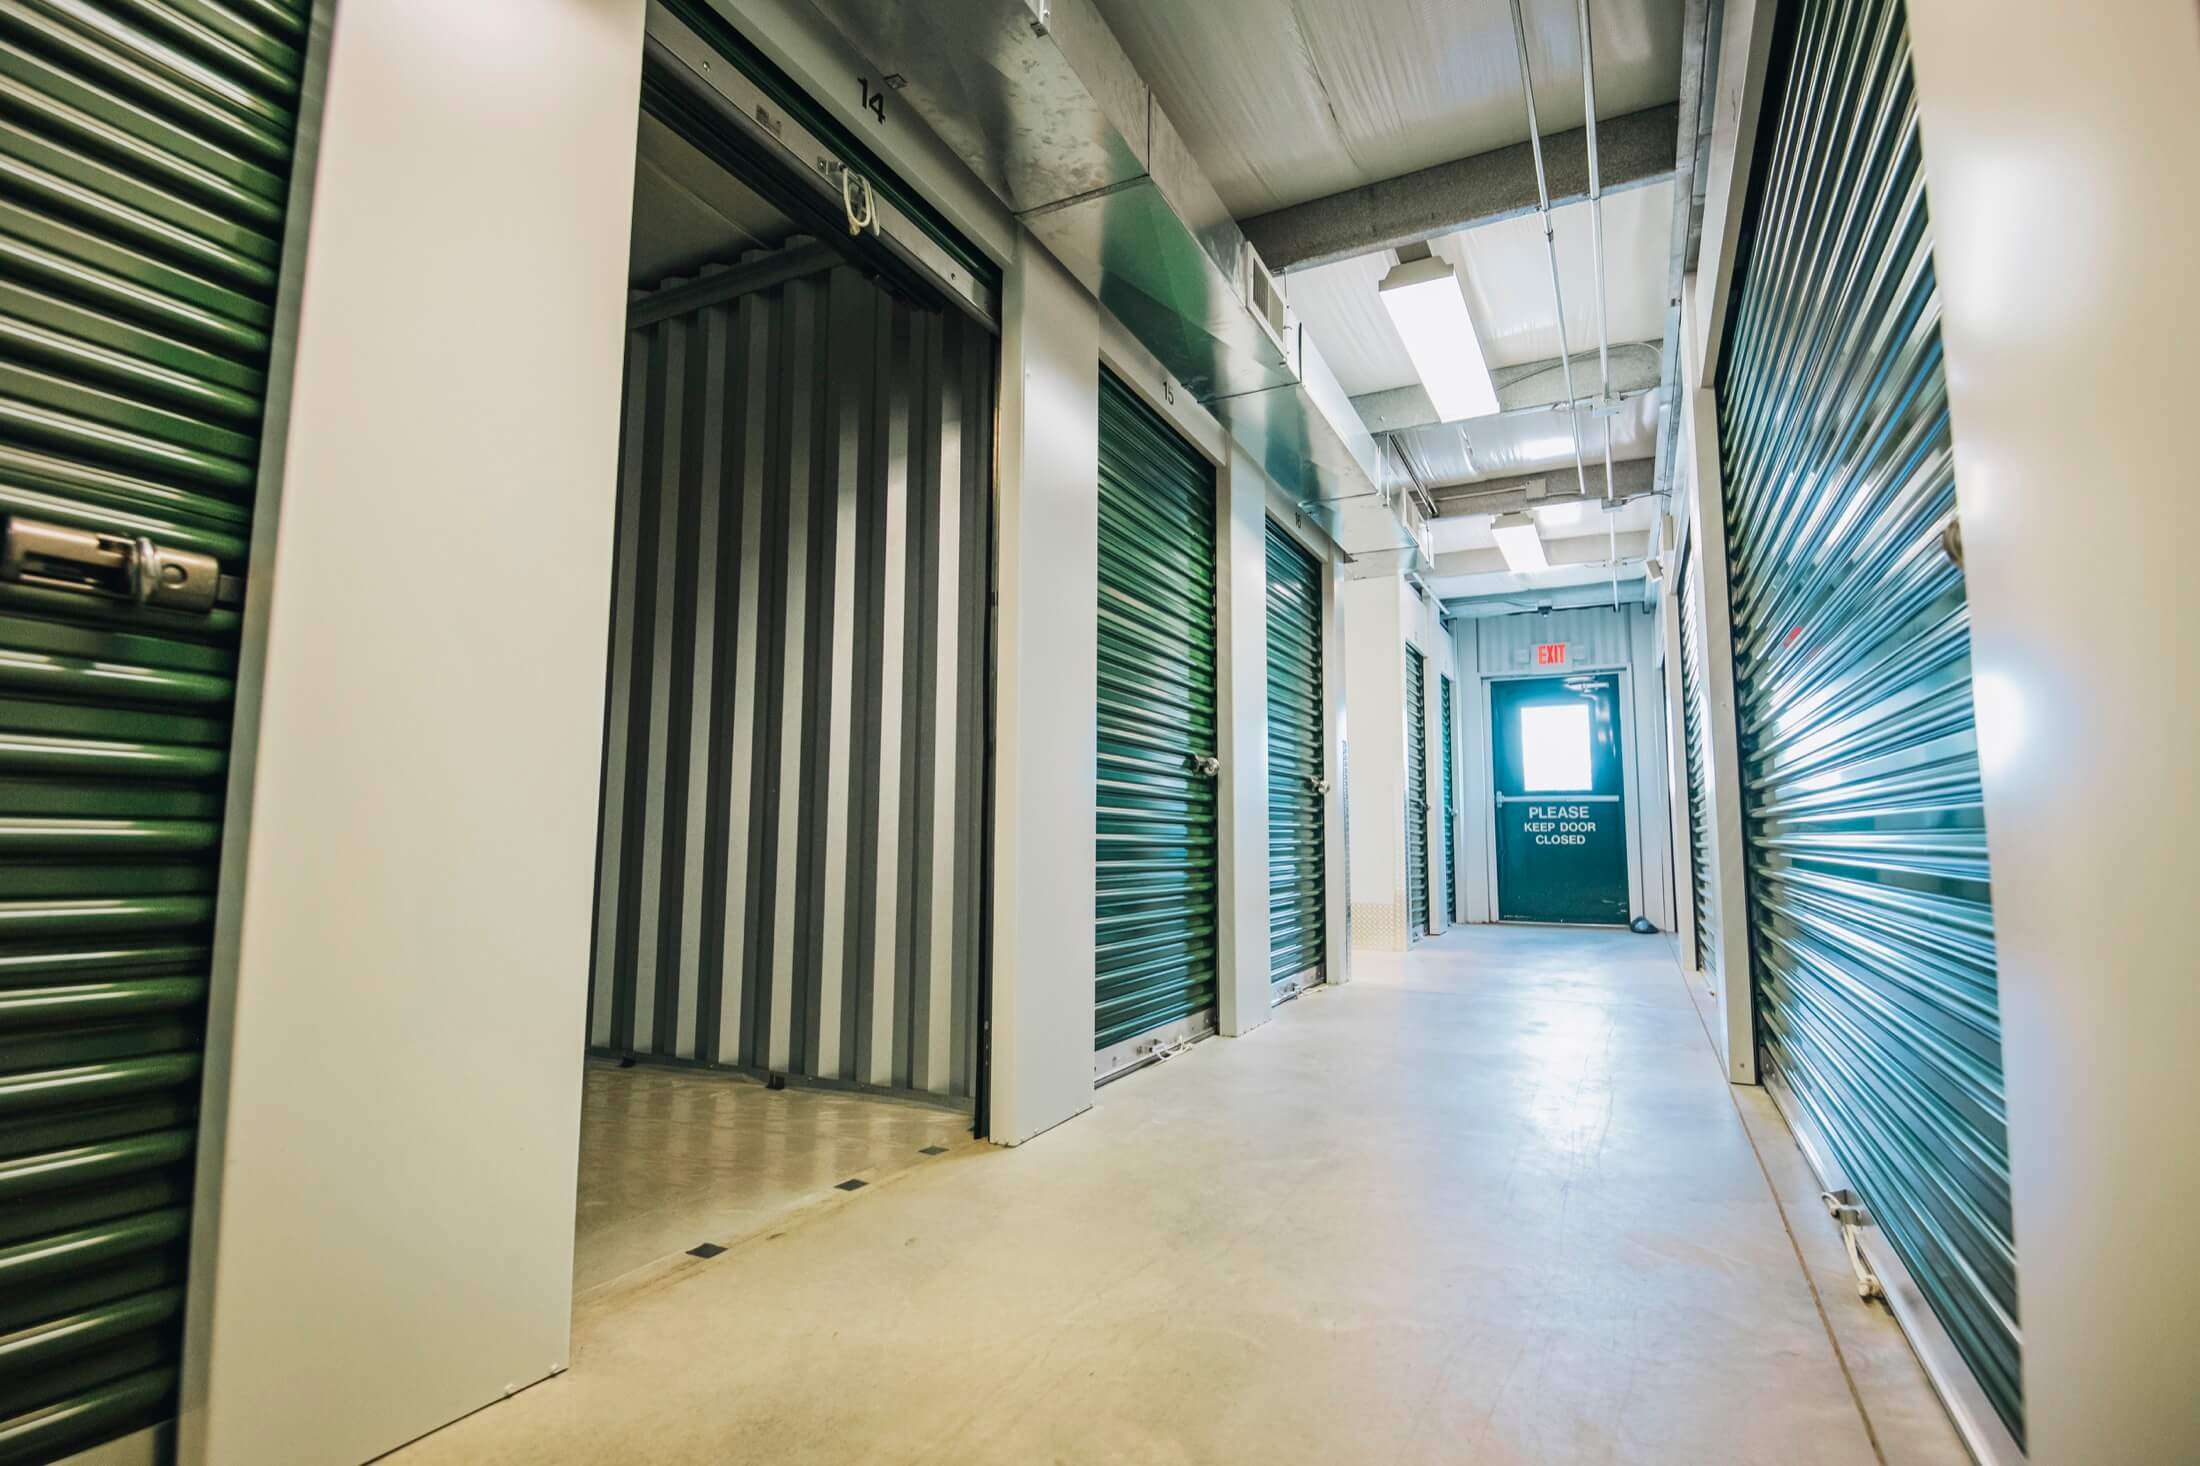 aisle of green indoor self storage units with one open